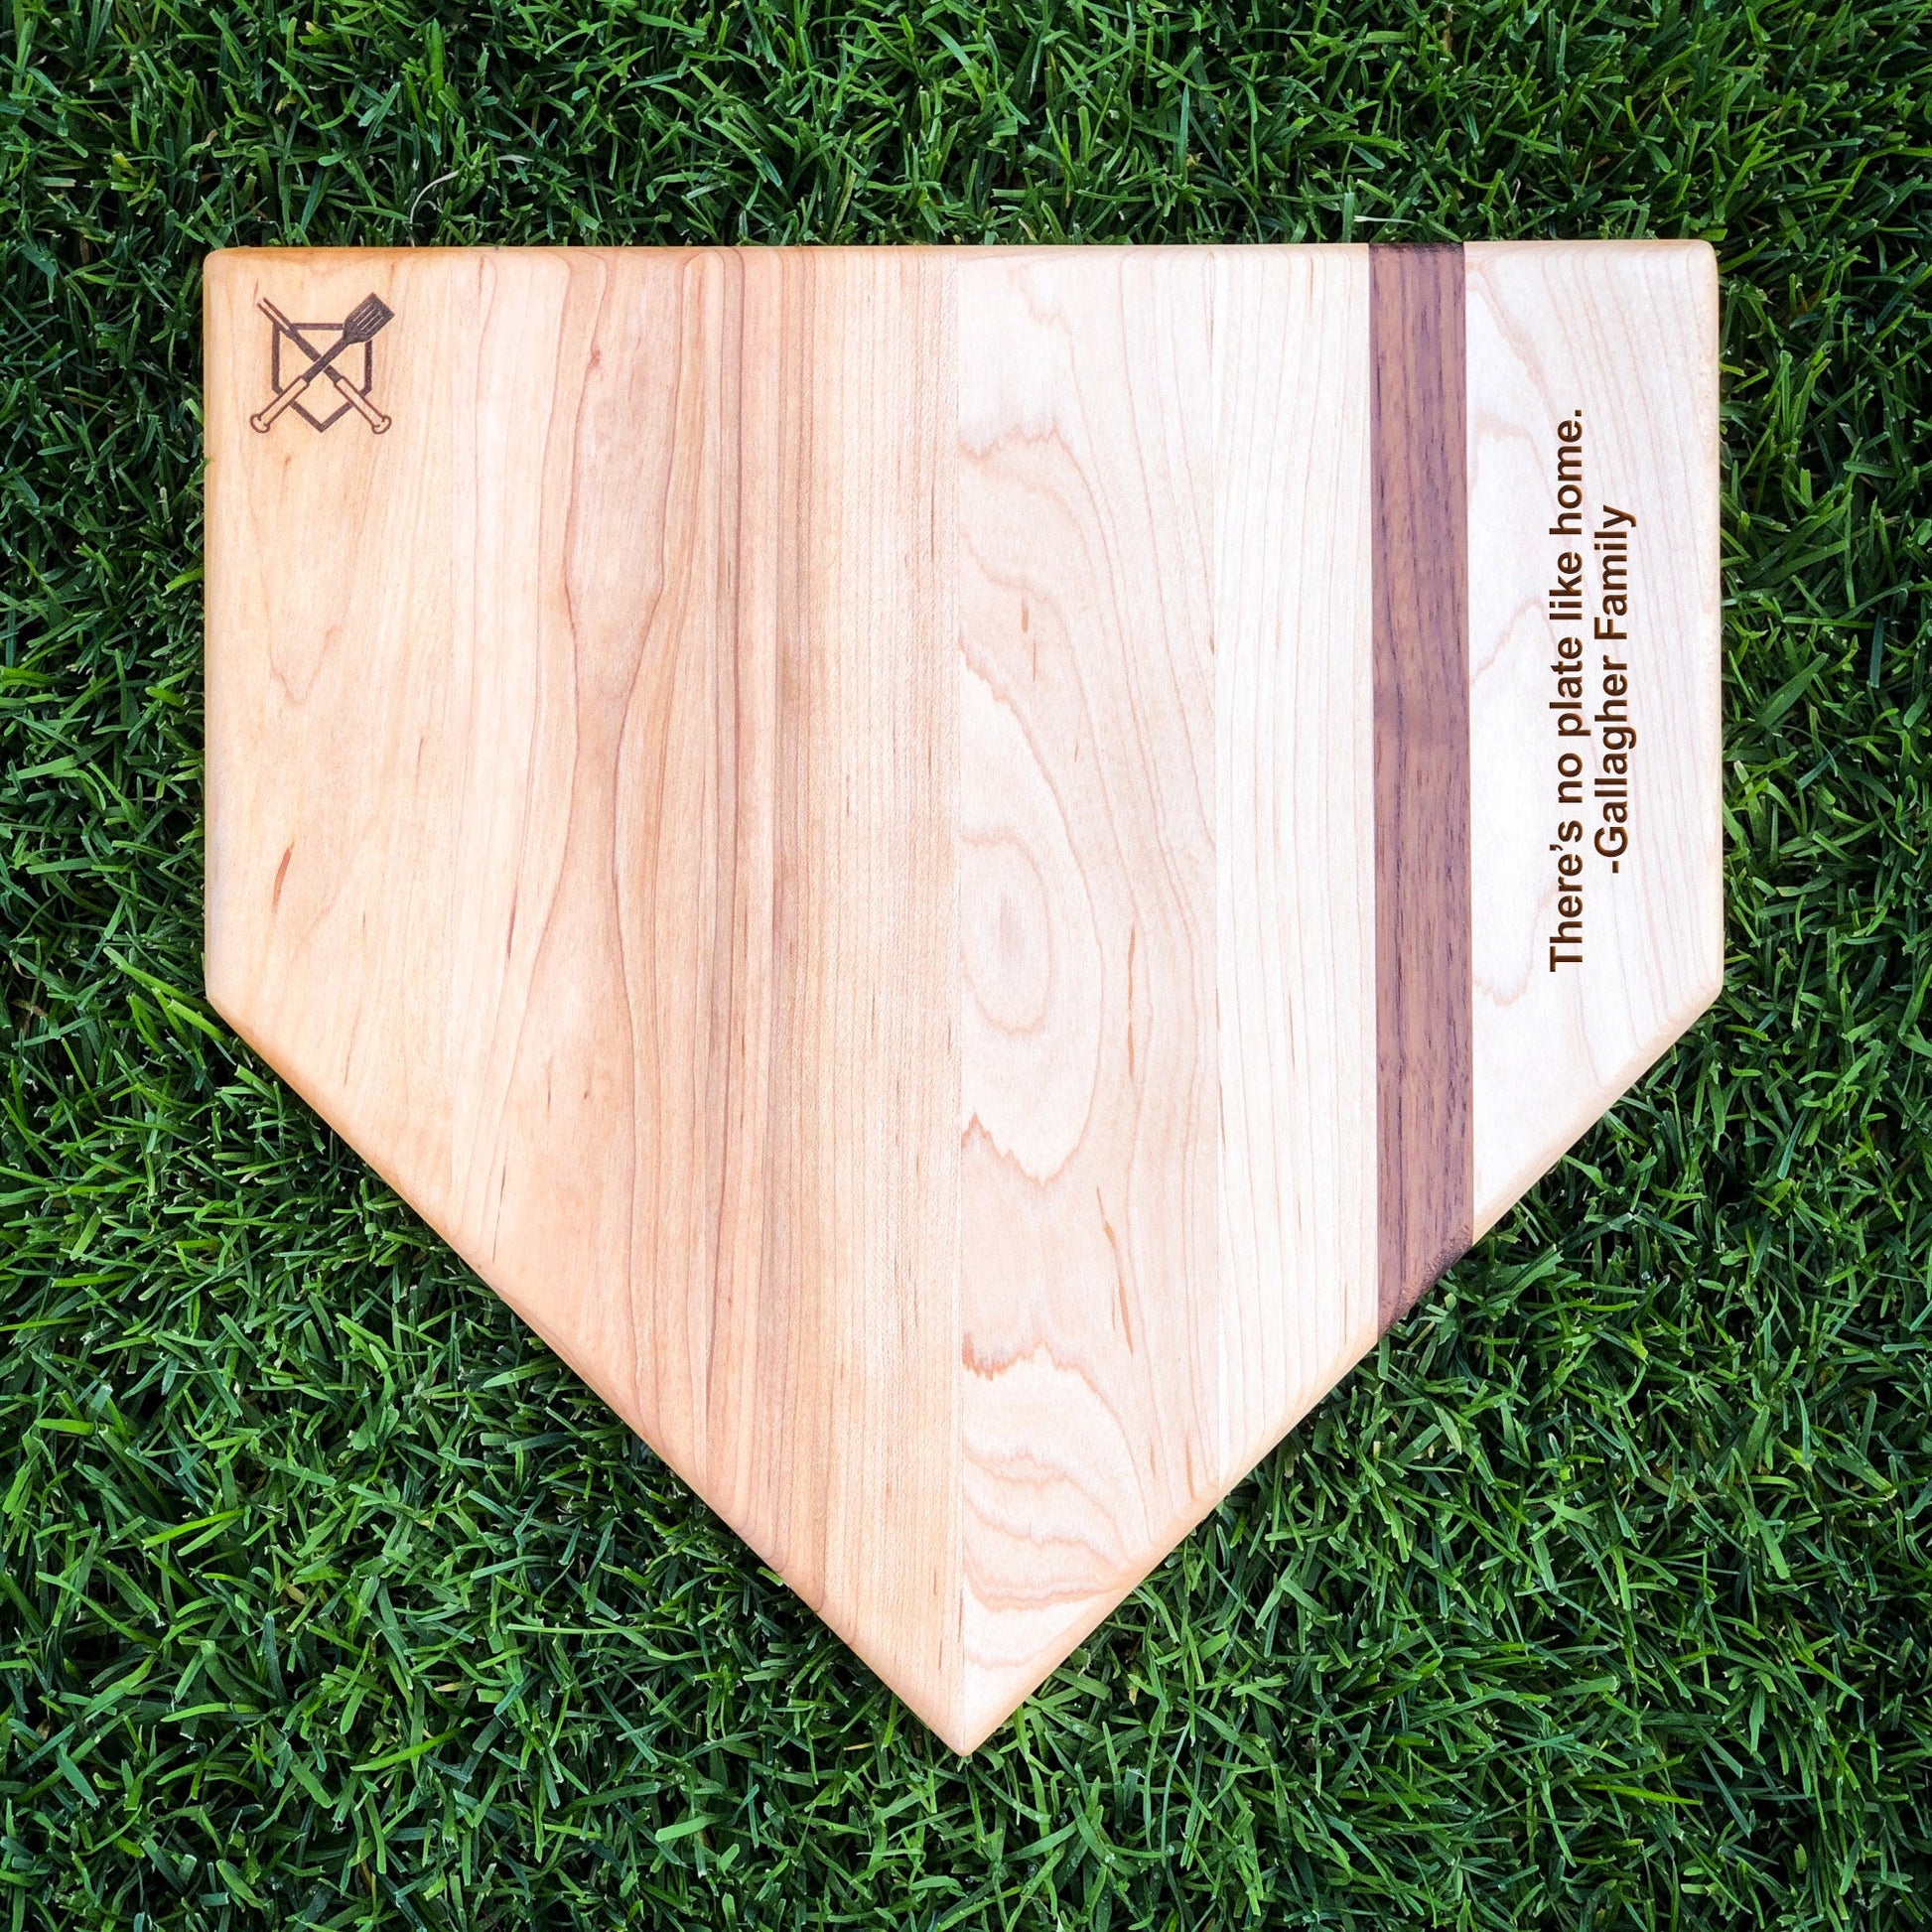 Full Size (17" x 17") Home Plate Cutting Board with Custom Text Engraving - The Tool Store